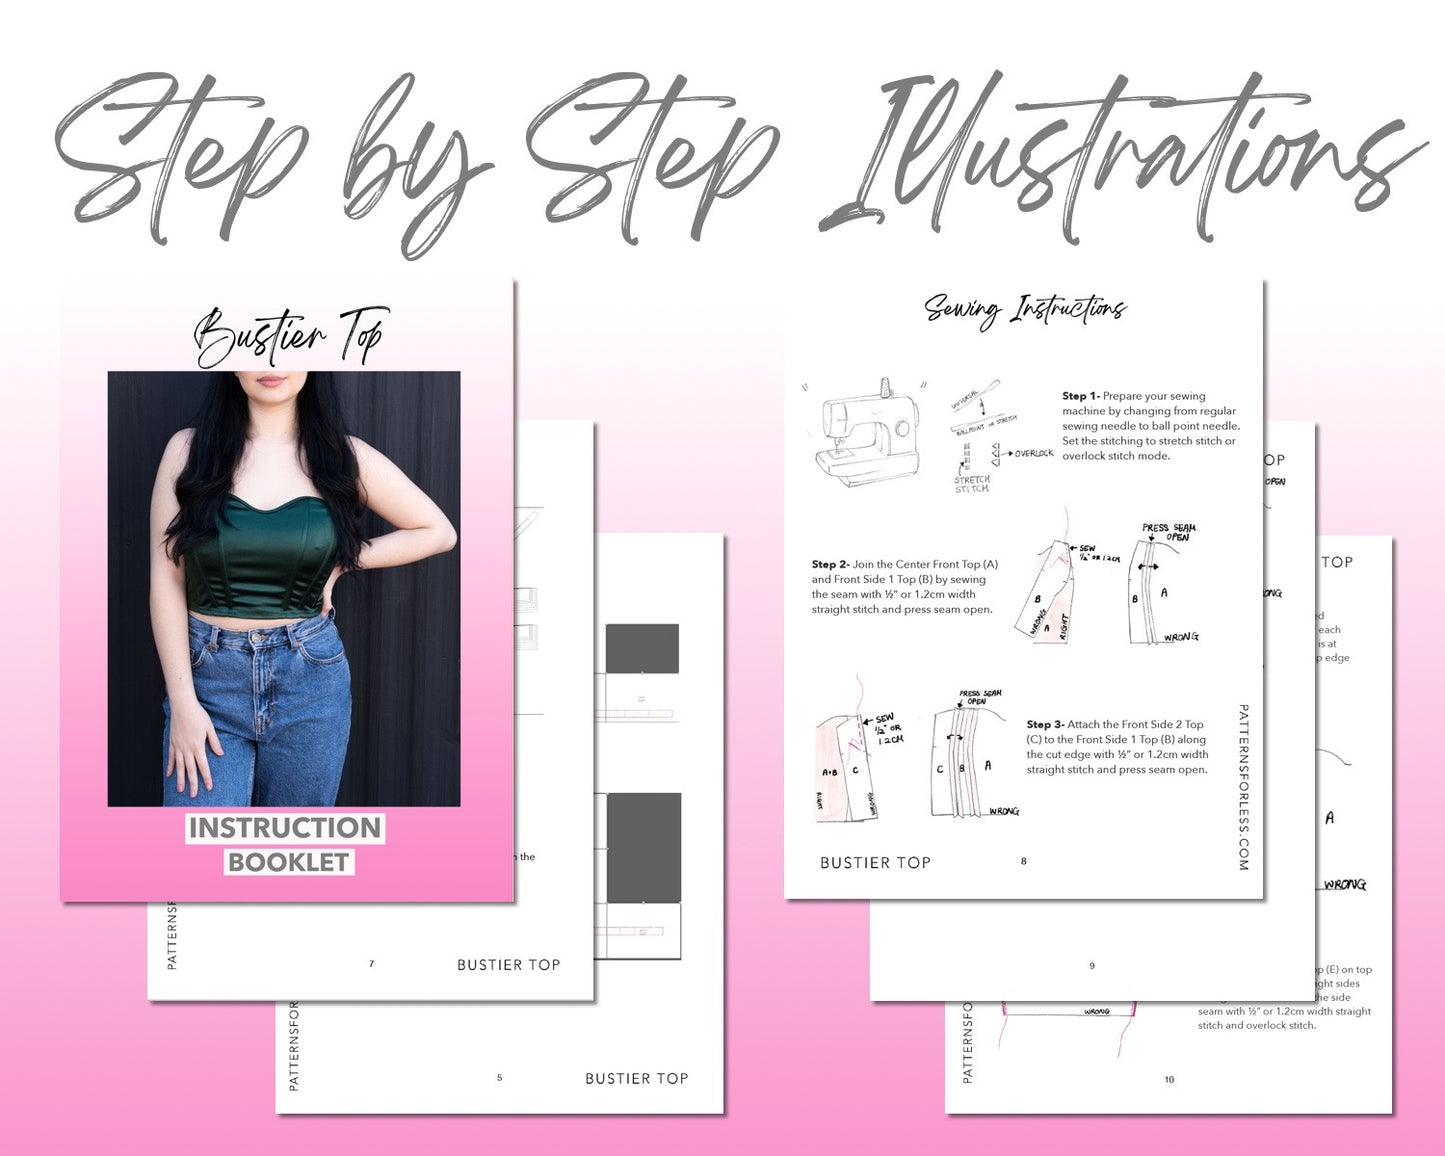 Bustier Knit Crop Top sewing pattern step by step illustrations.